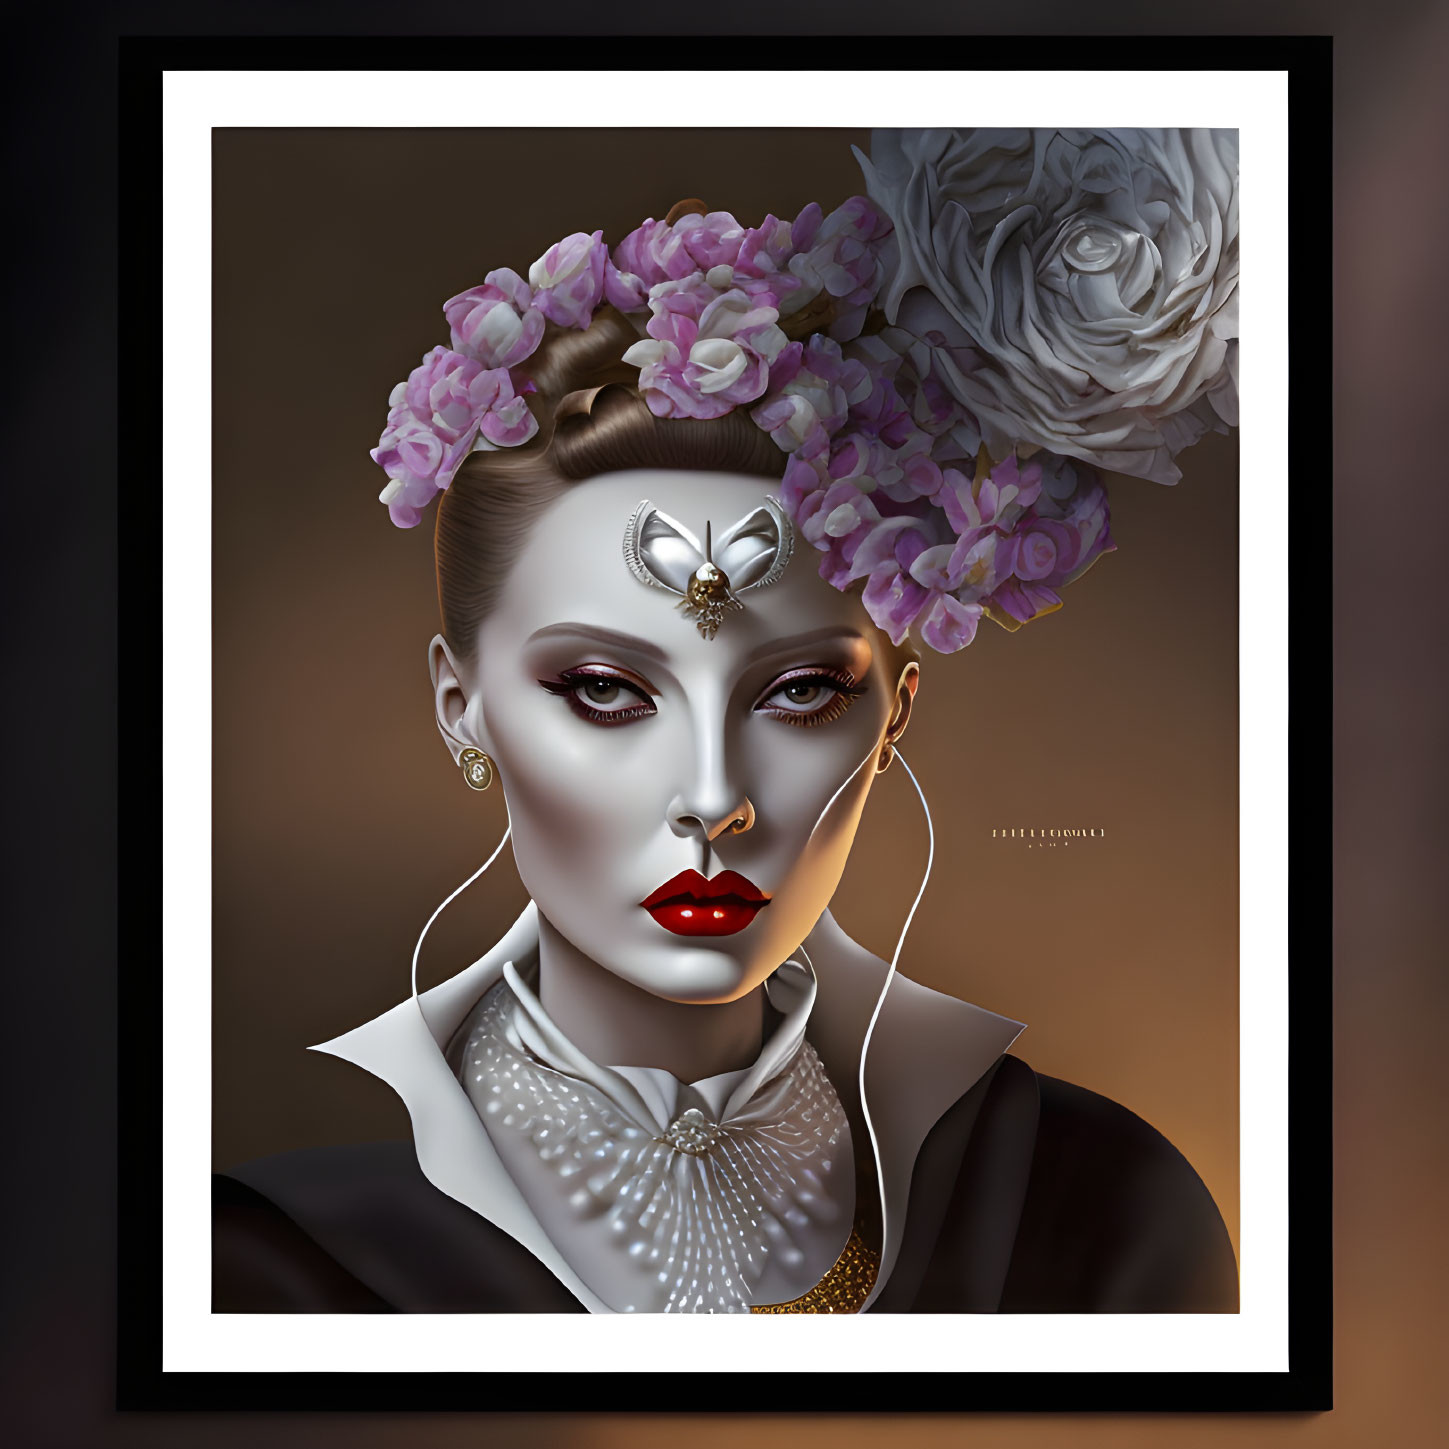 Stylized portrait of woman with floral headpiece and elegant attire.